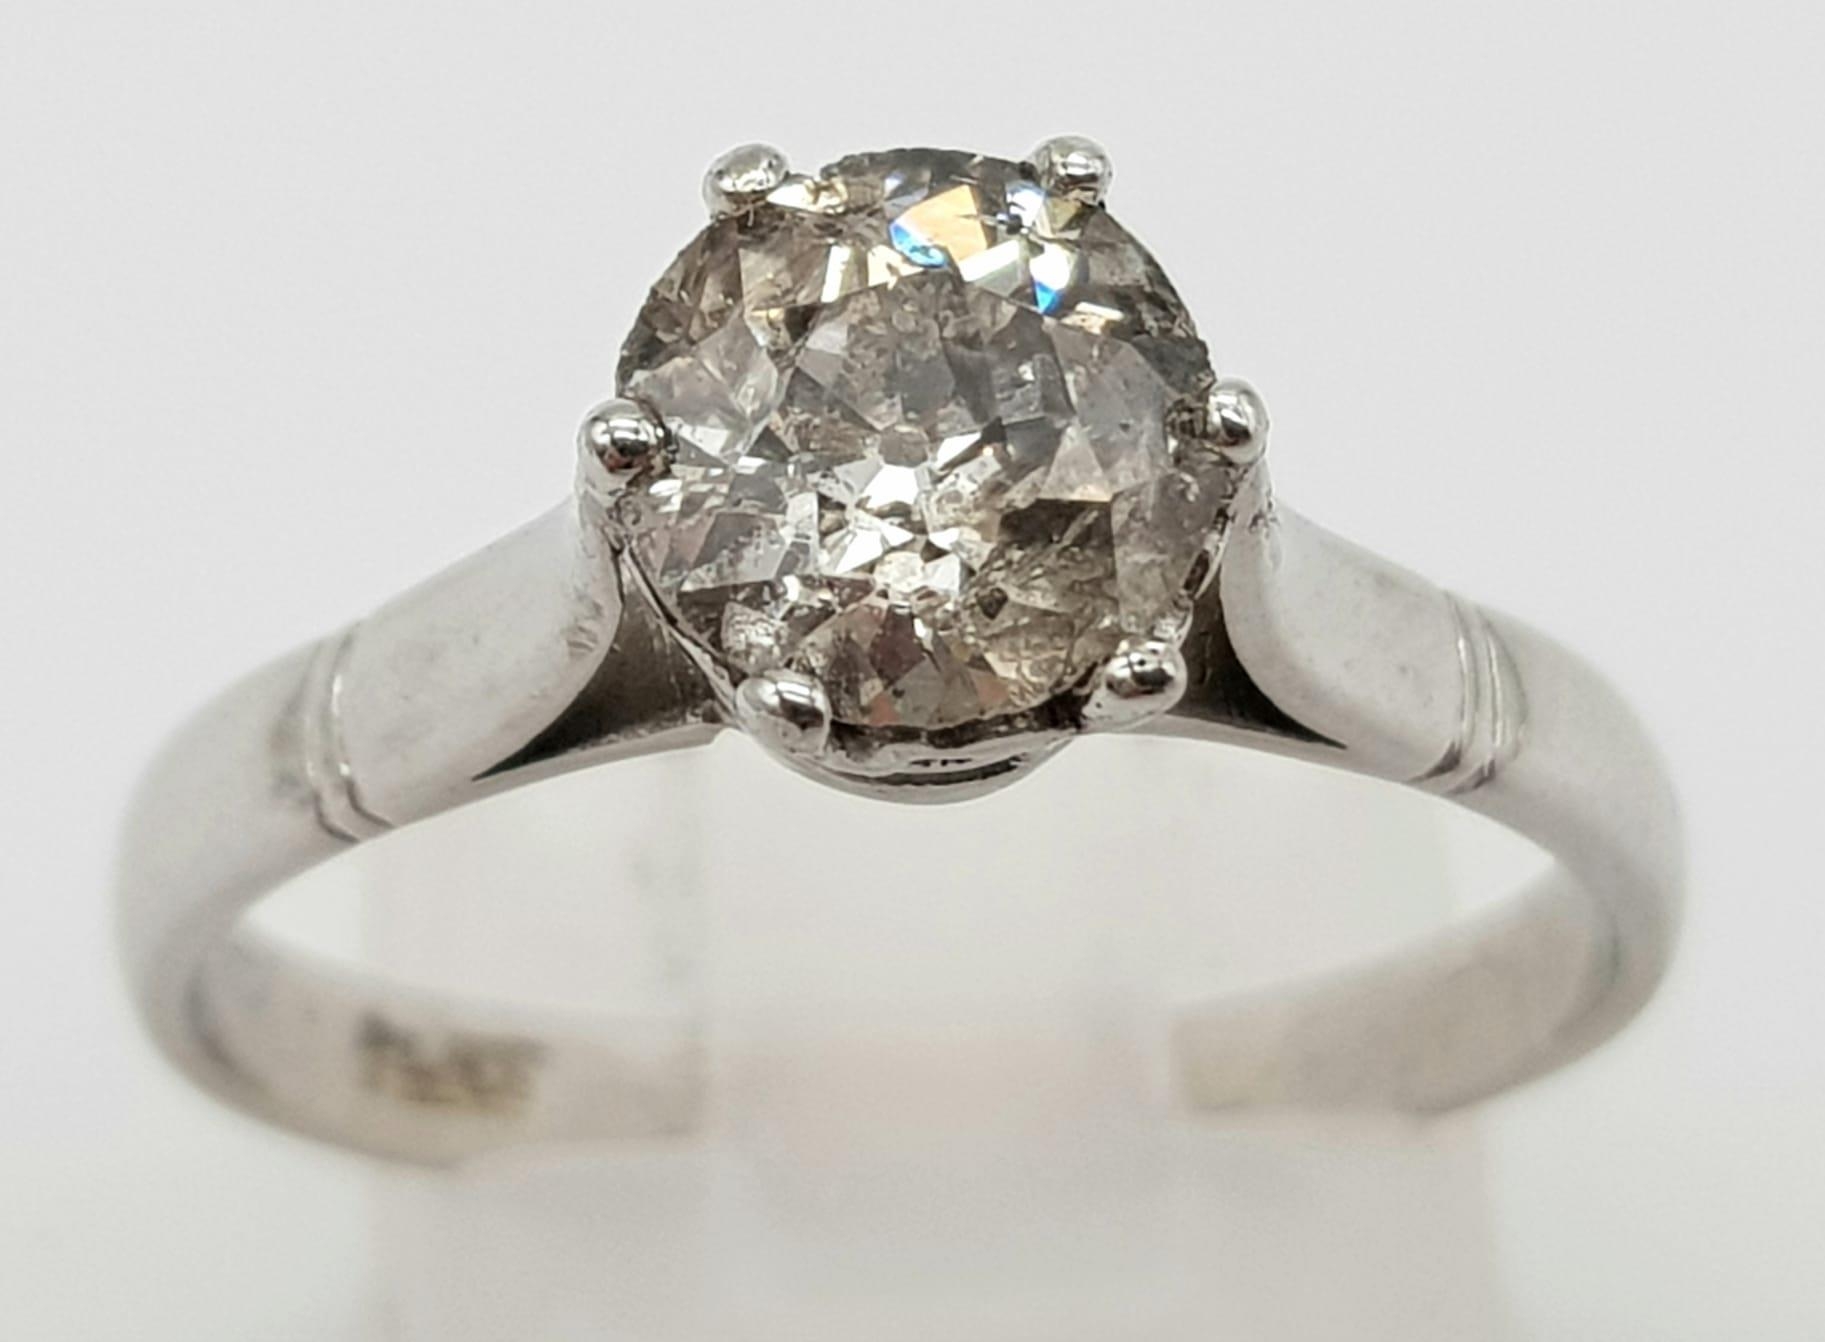 PLATINUM DIAMOND SOLIATIRE RING. 1.30CT APPROX DIAMOND. TOTAL WEIGHT 9.5G SIZE R - Image 2 of 6